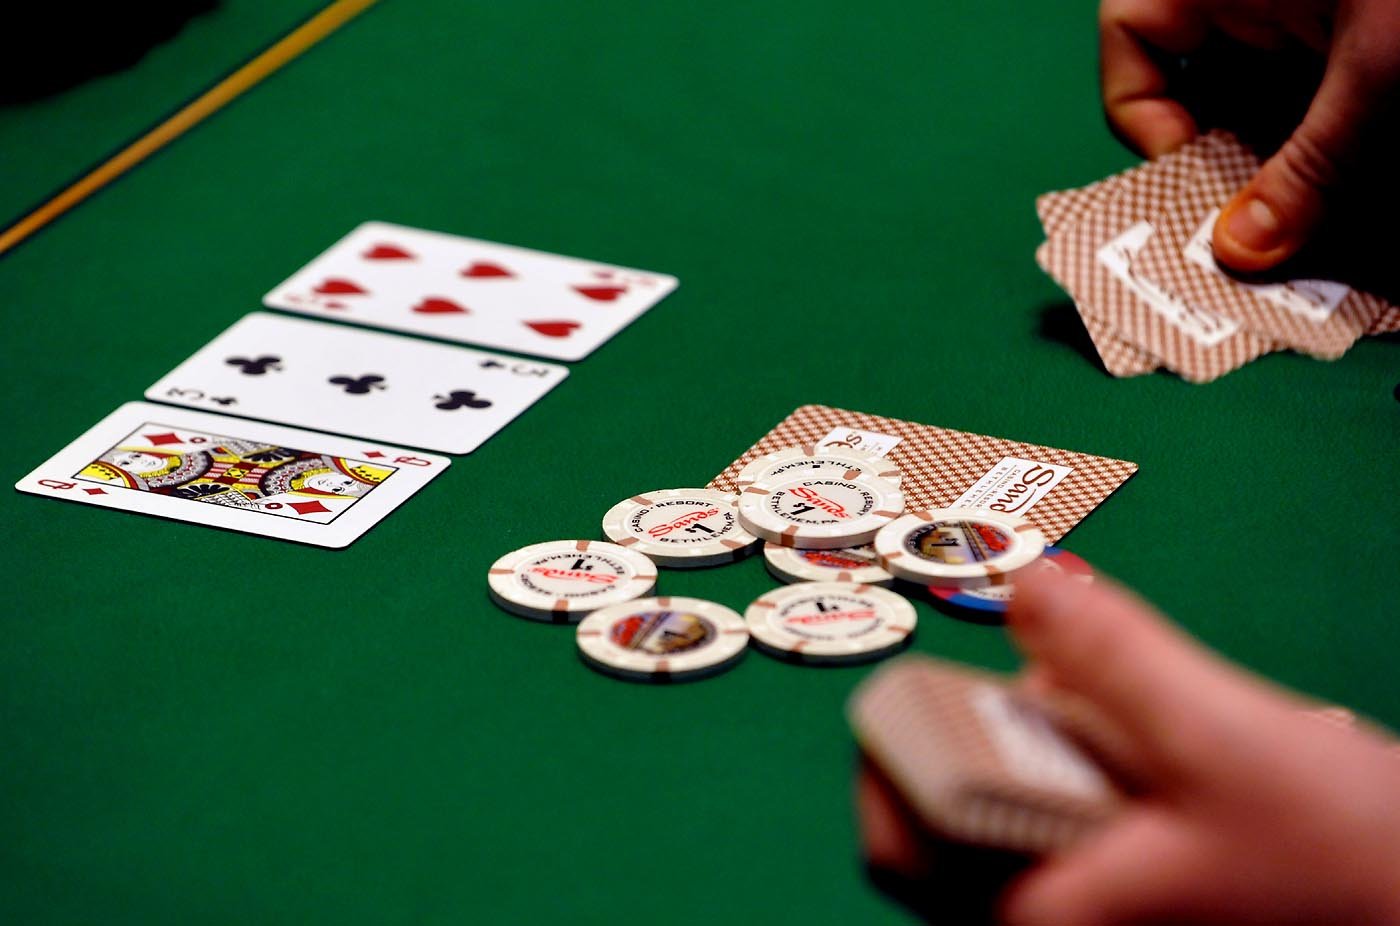 Card Marking-Cheating with Marked Cards in Blackjack Games